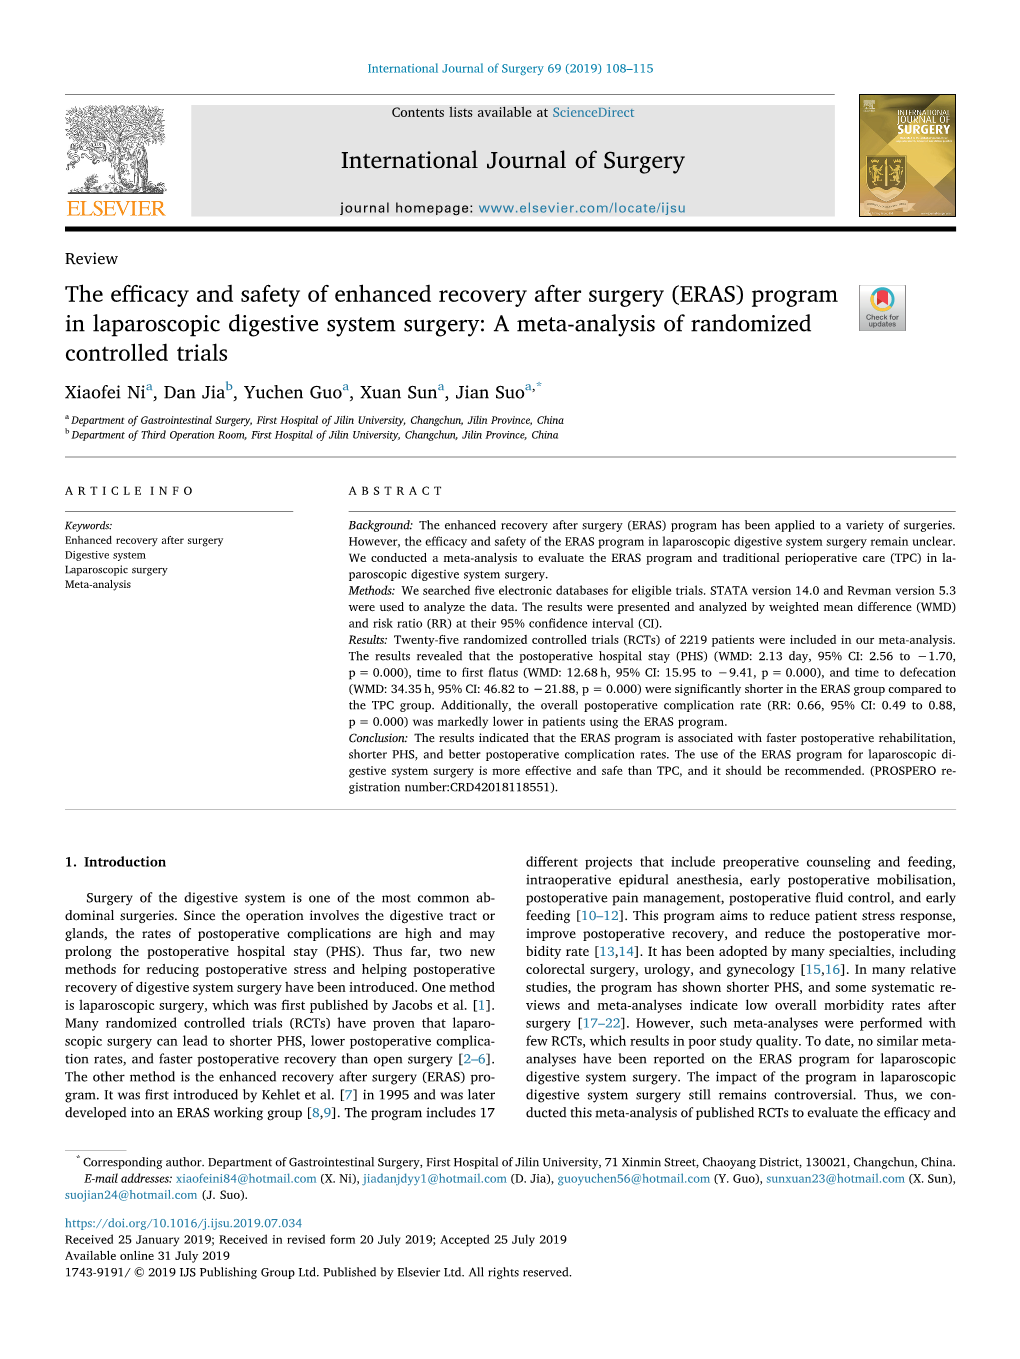 The Efficacy and Safety of Enhanced Recovery After Surgery (ERAS